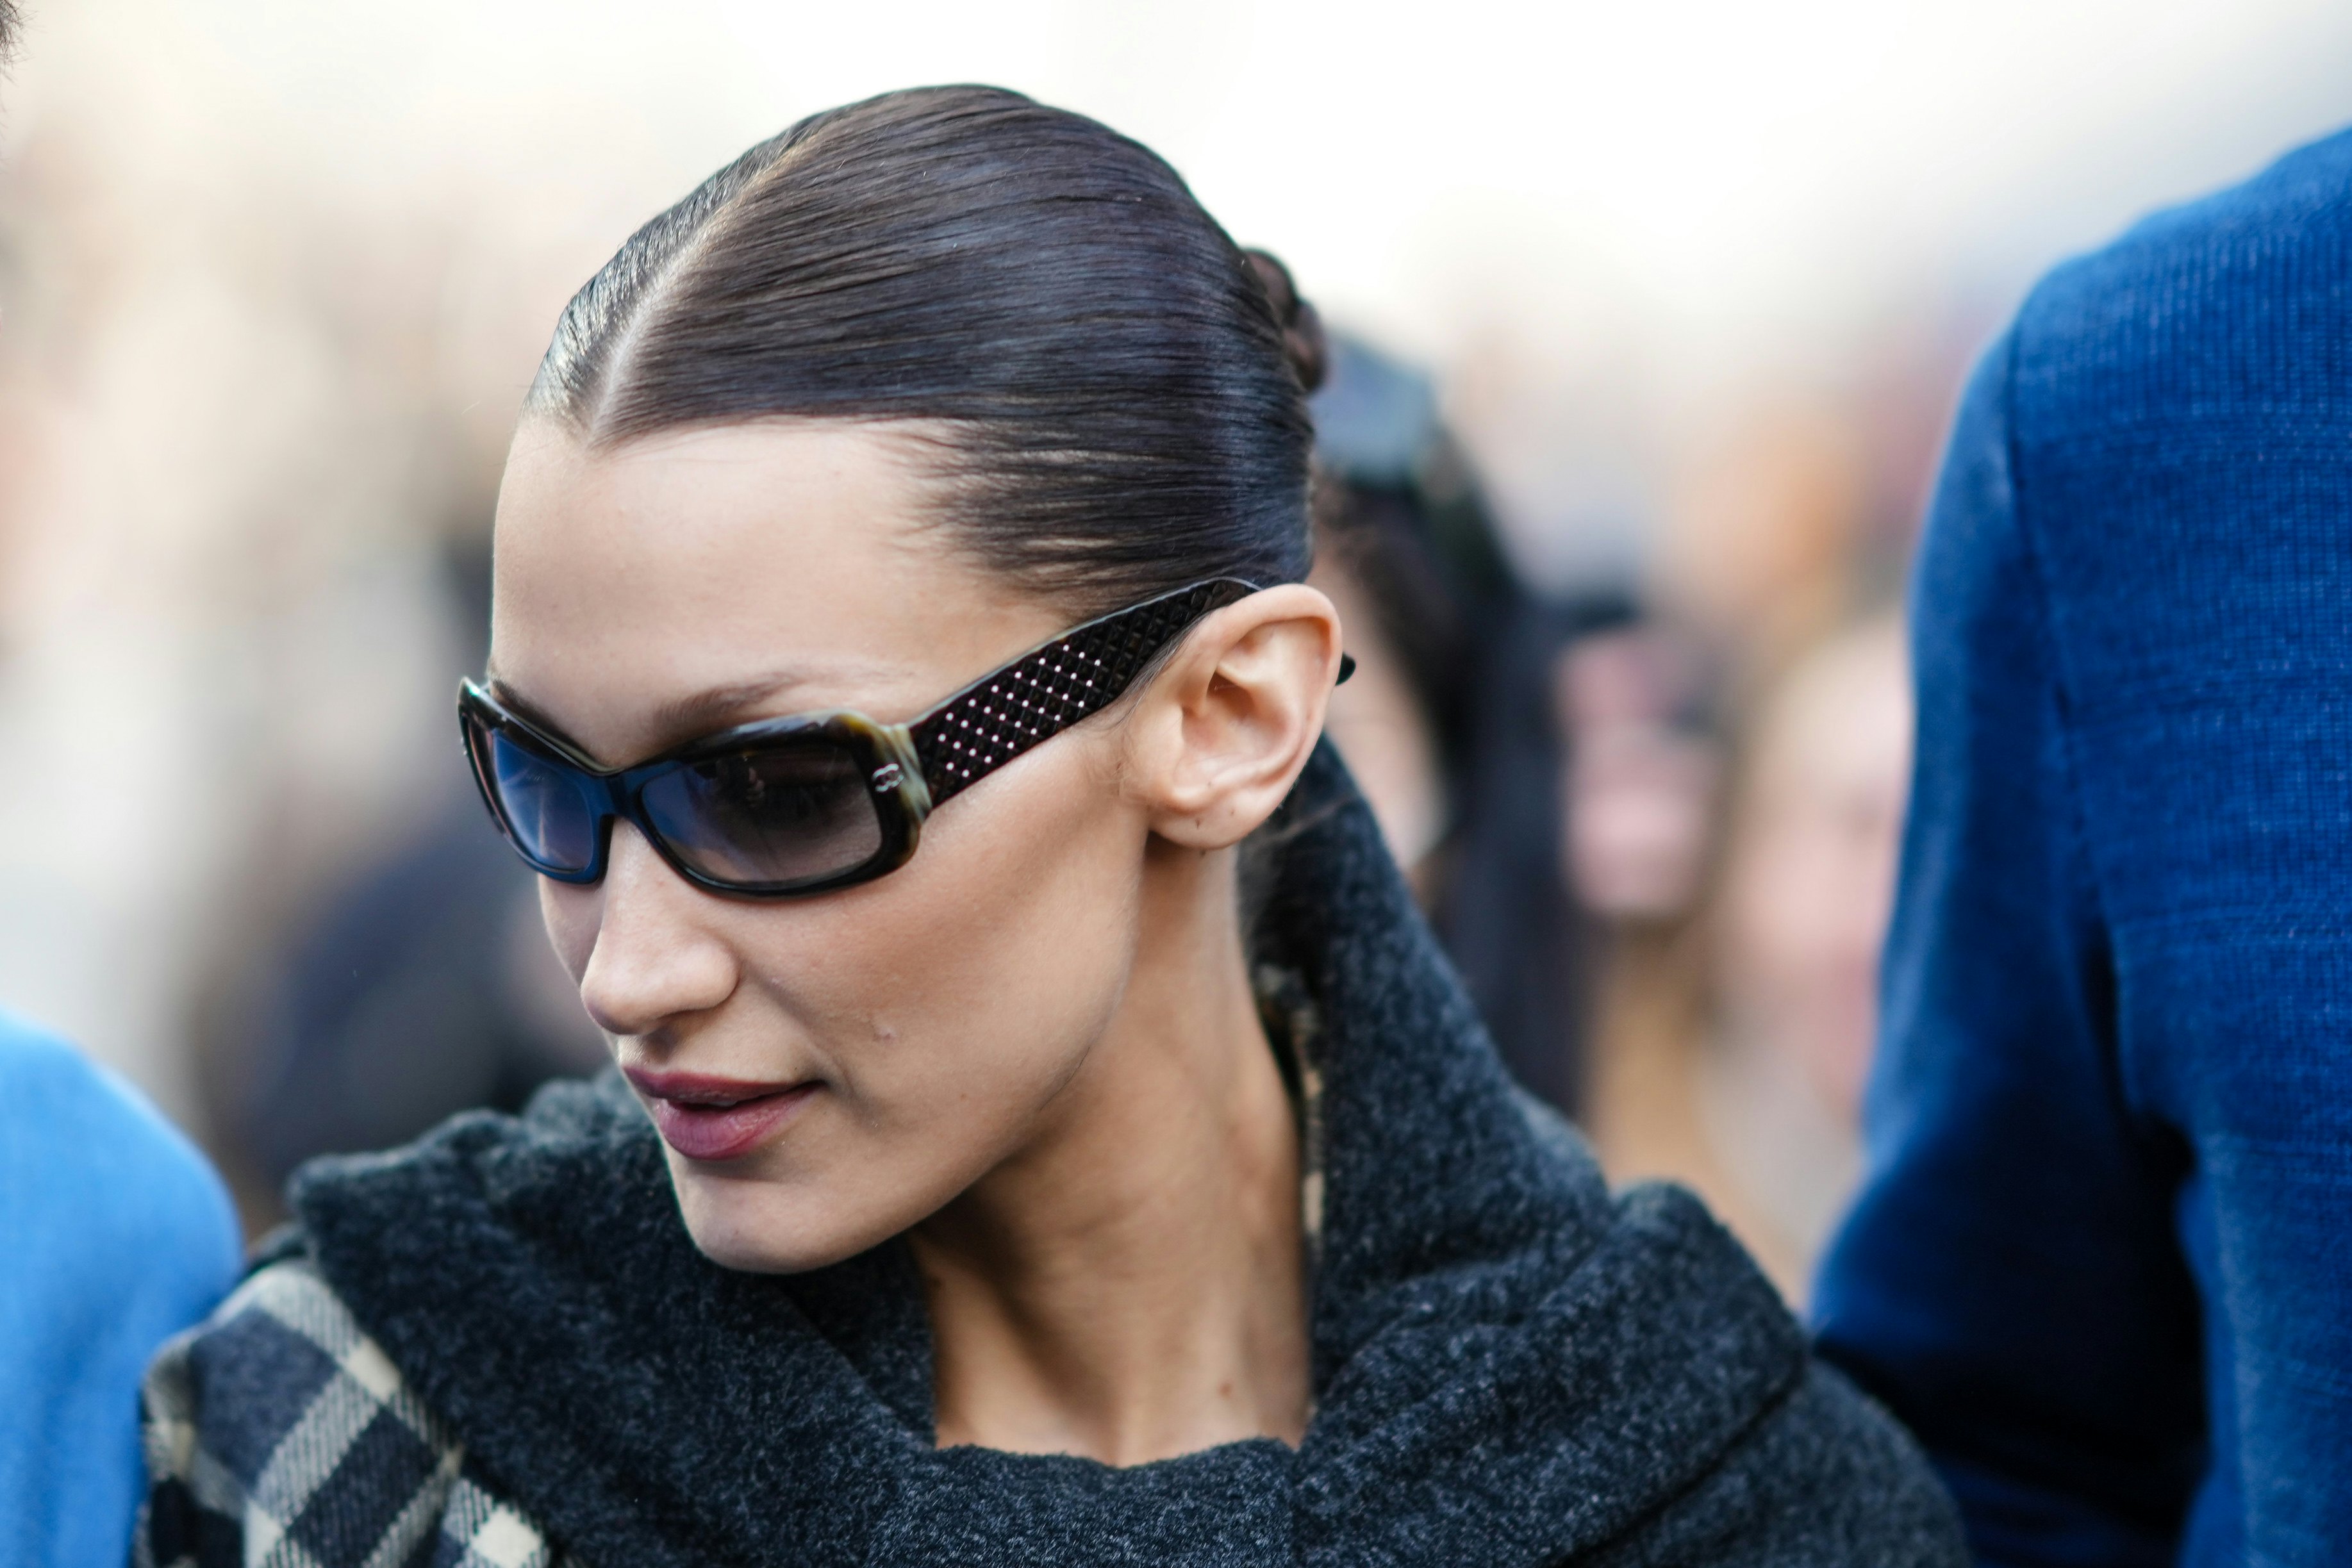 Paris Fashion Week confirmed that skinny brows are back